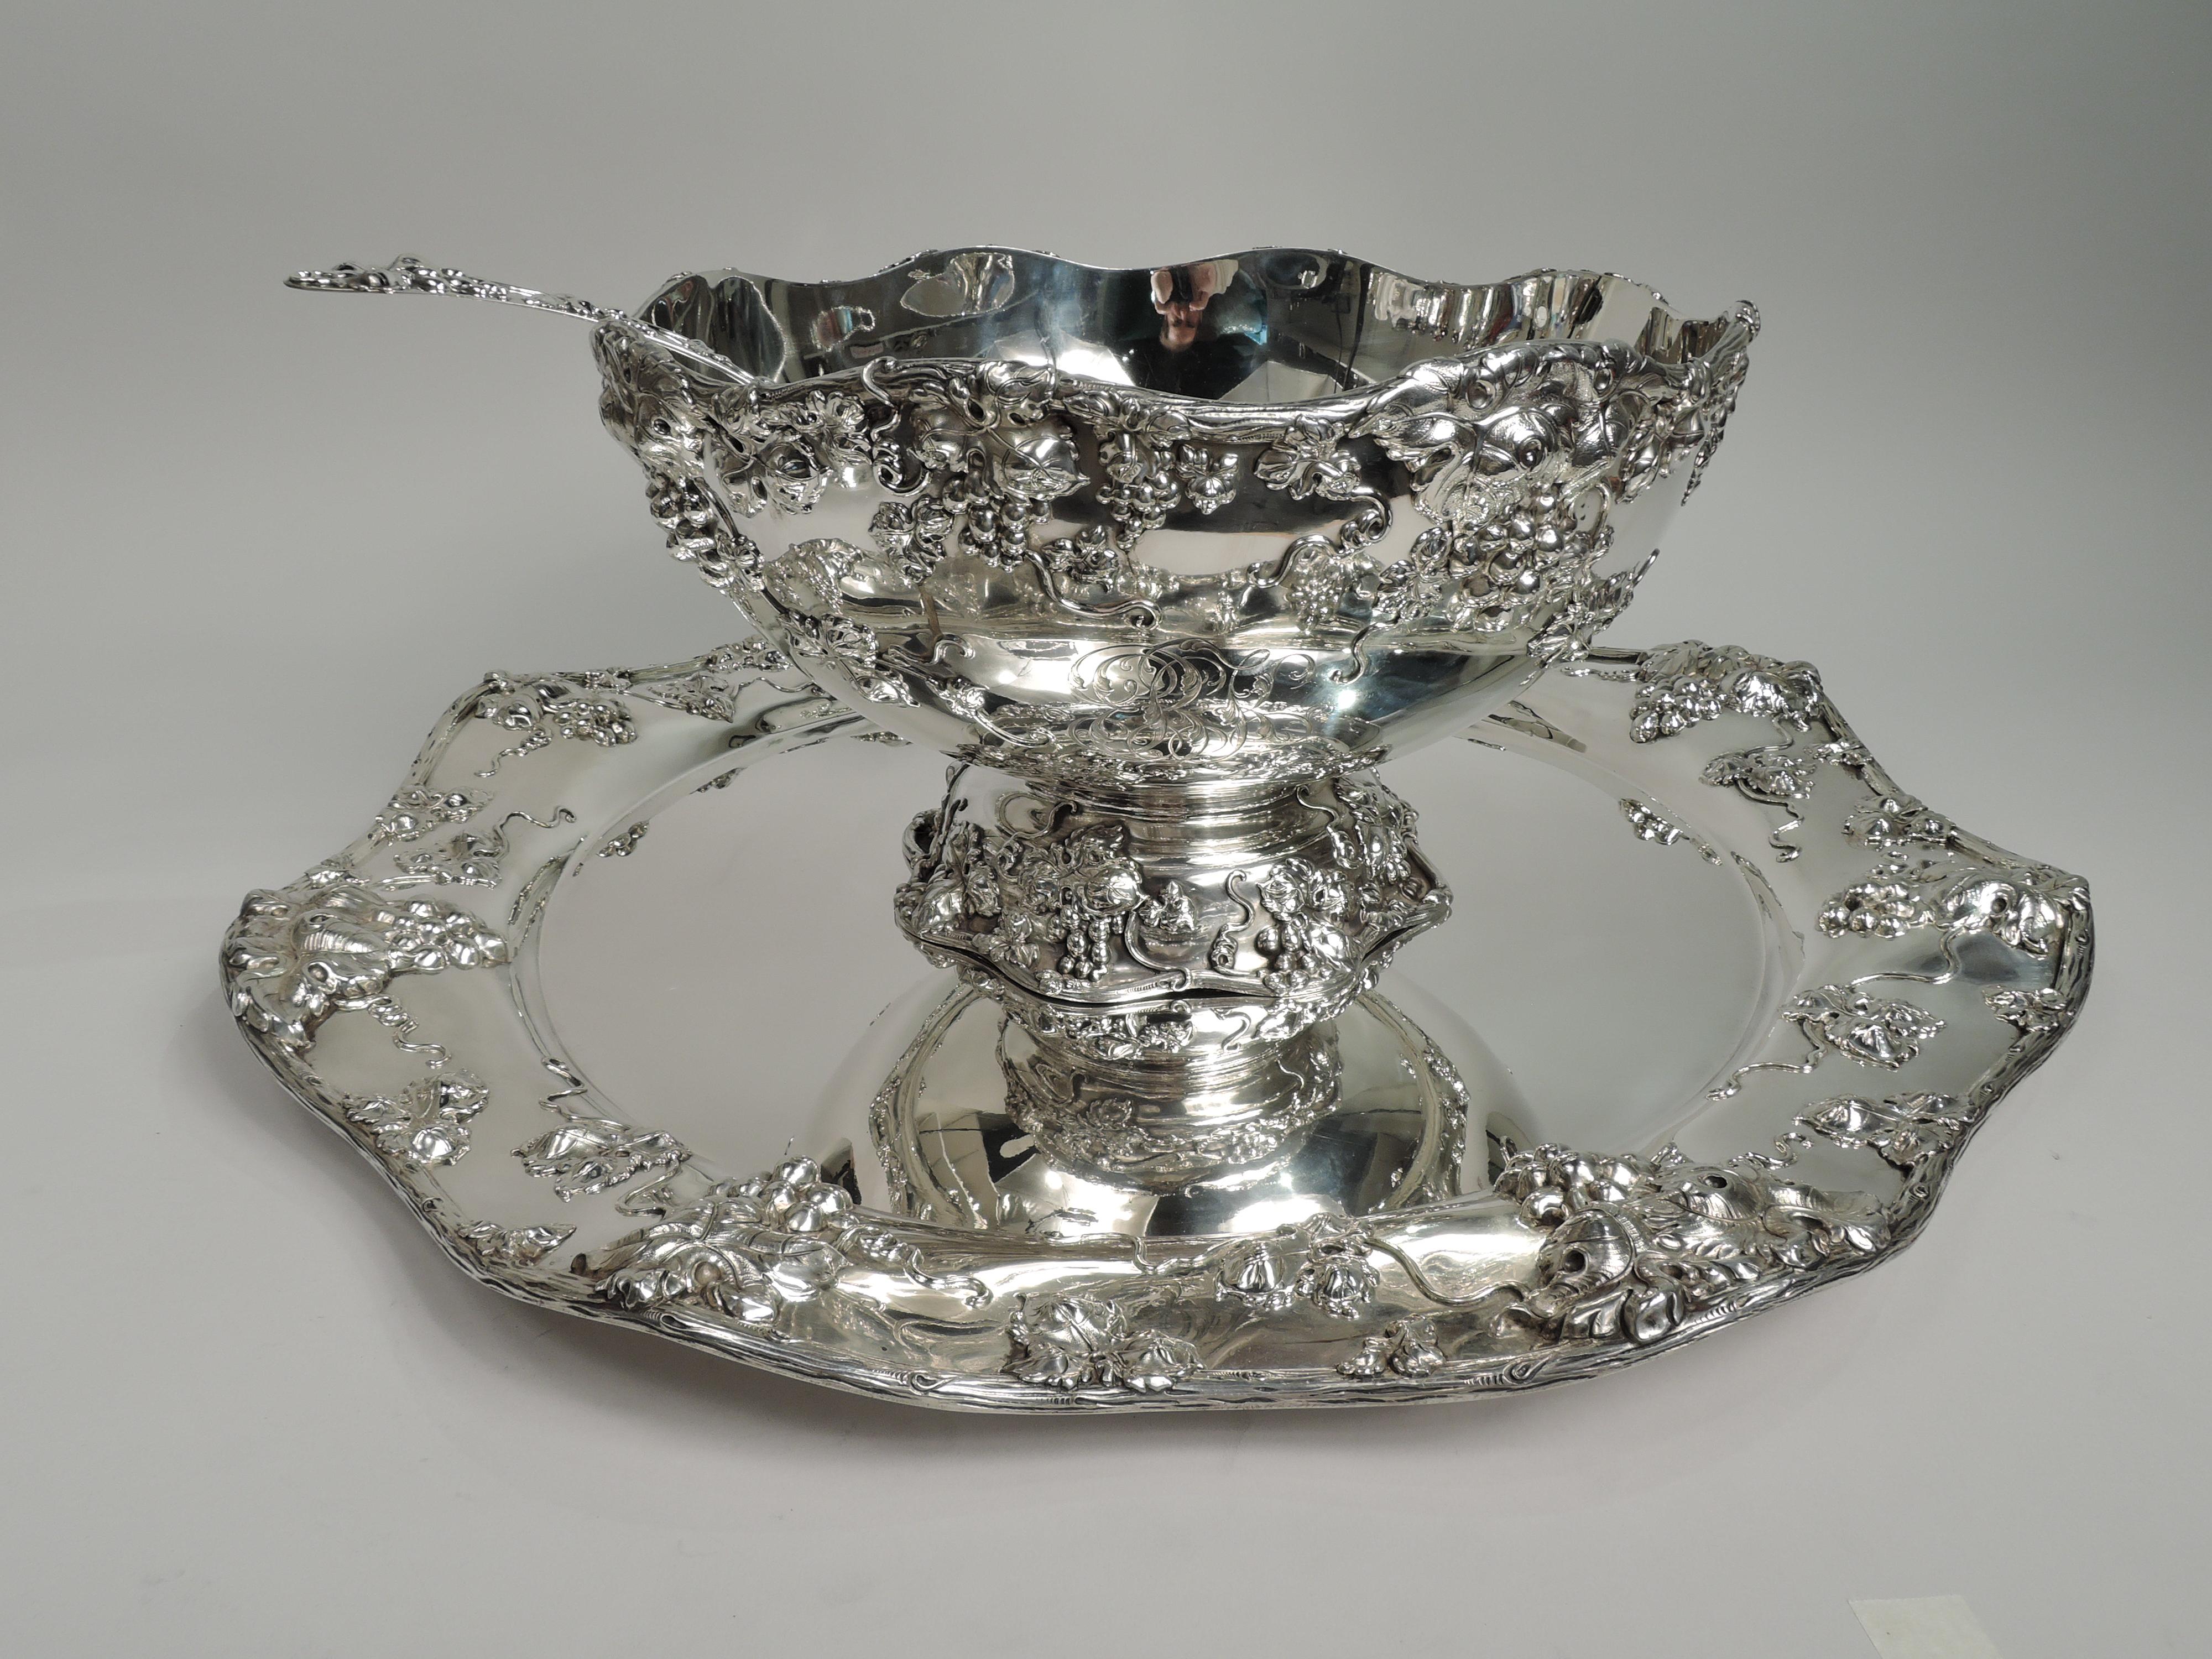 Victorian American Gilded Age Punch Bowl Centerpiece by Frank W Smith